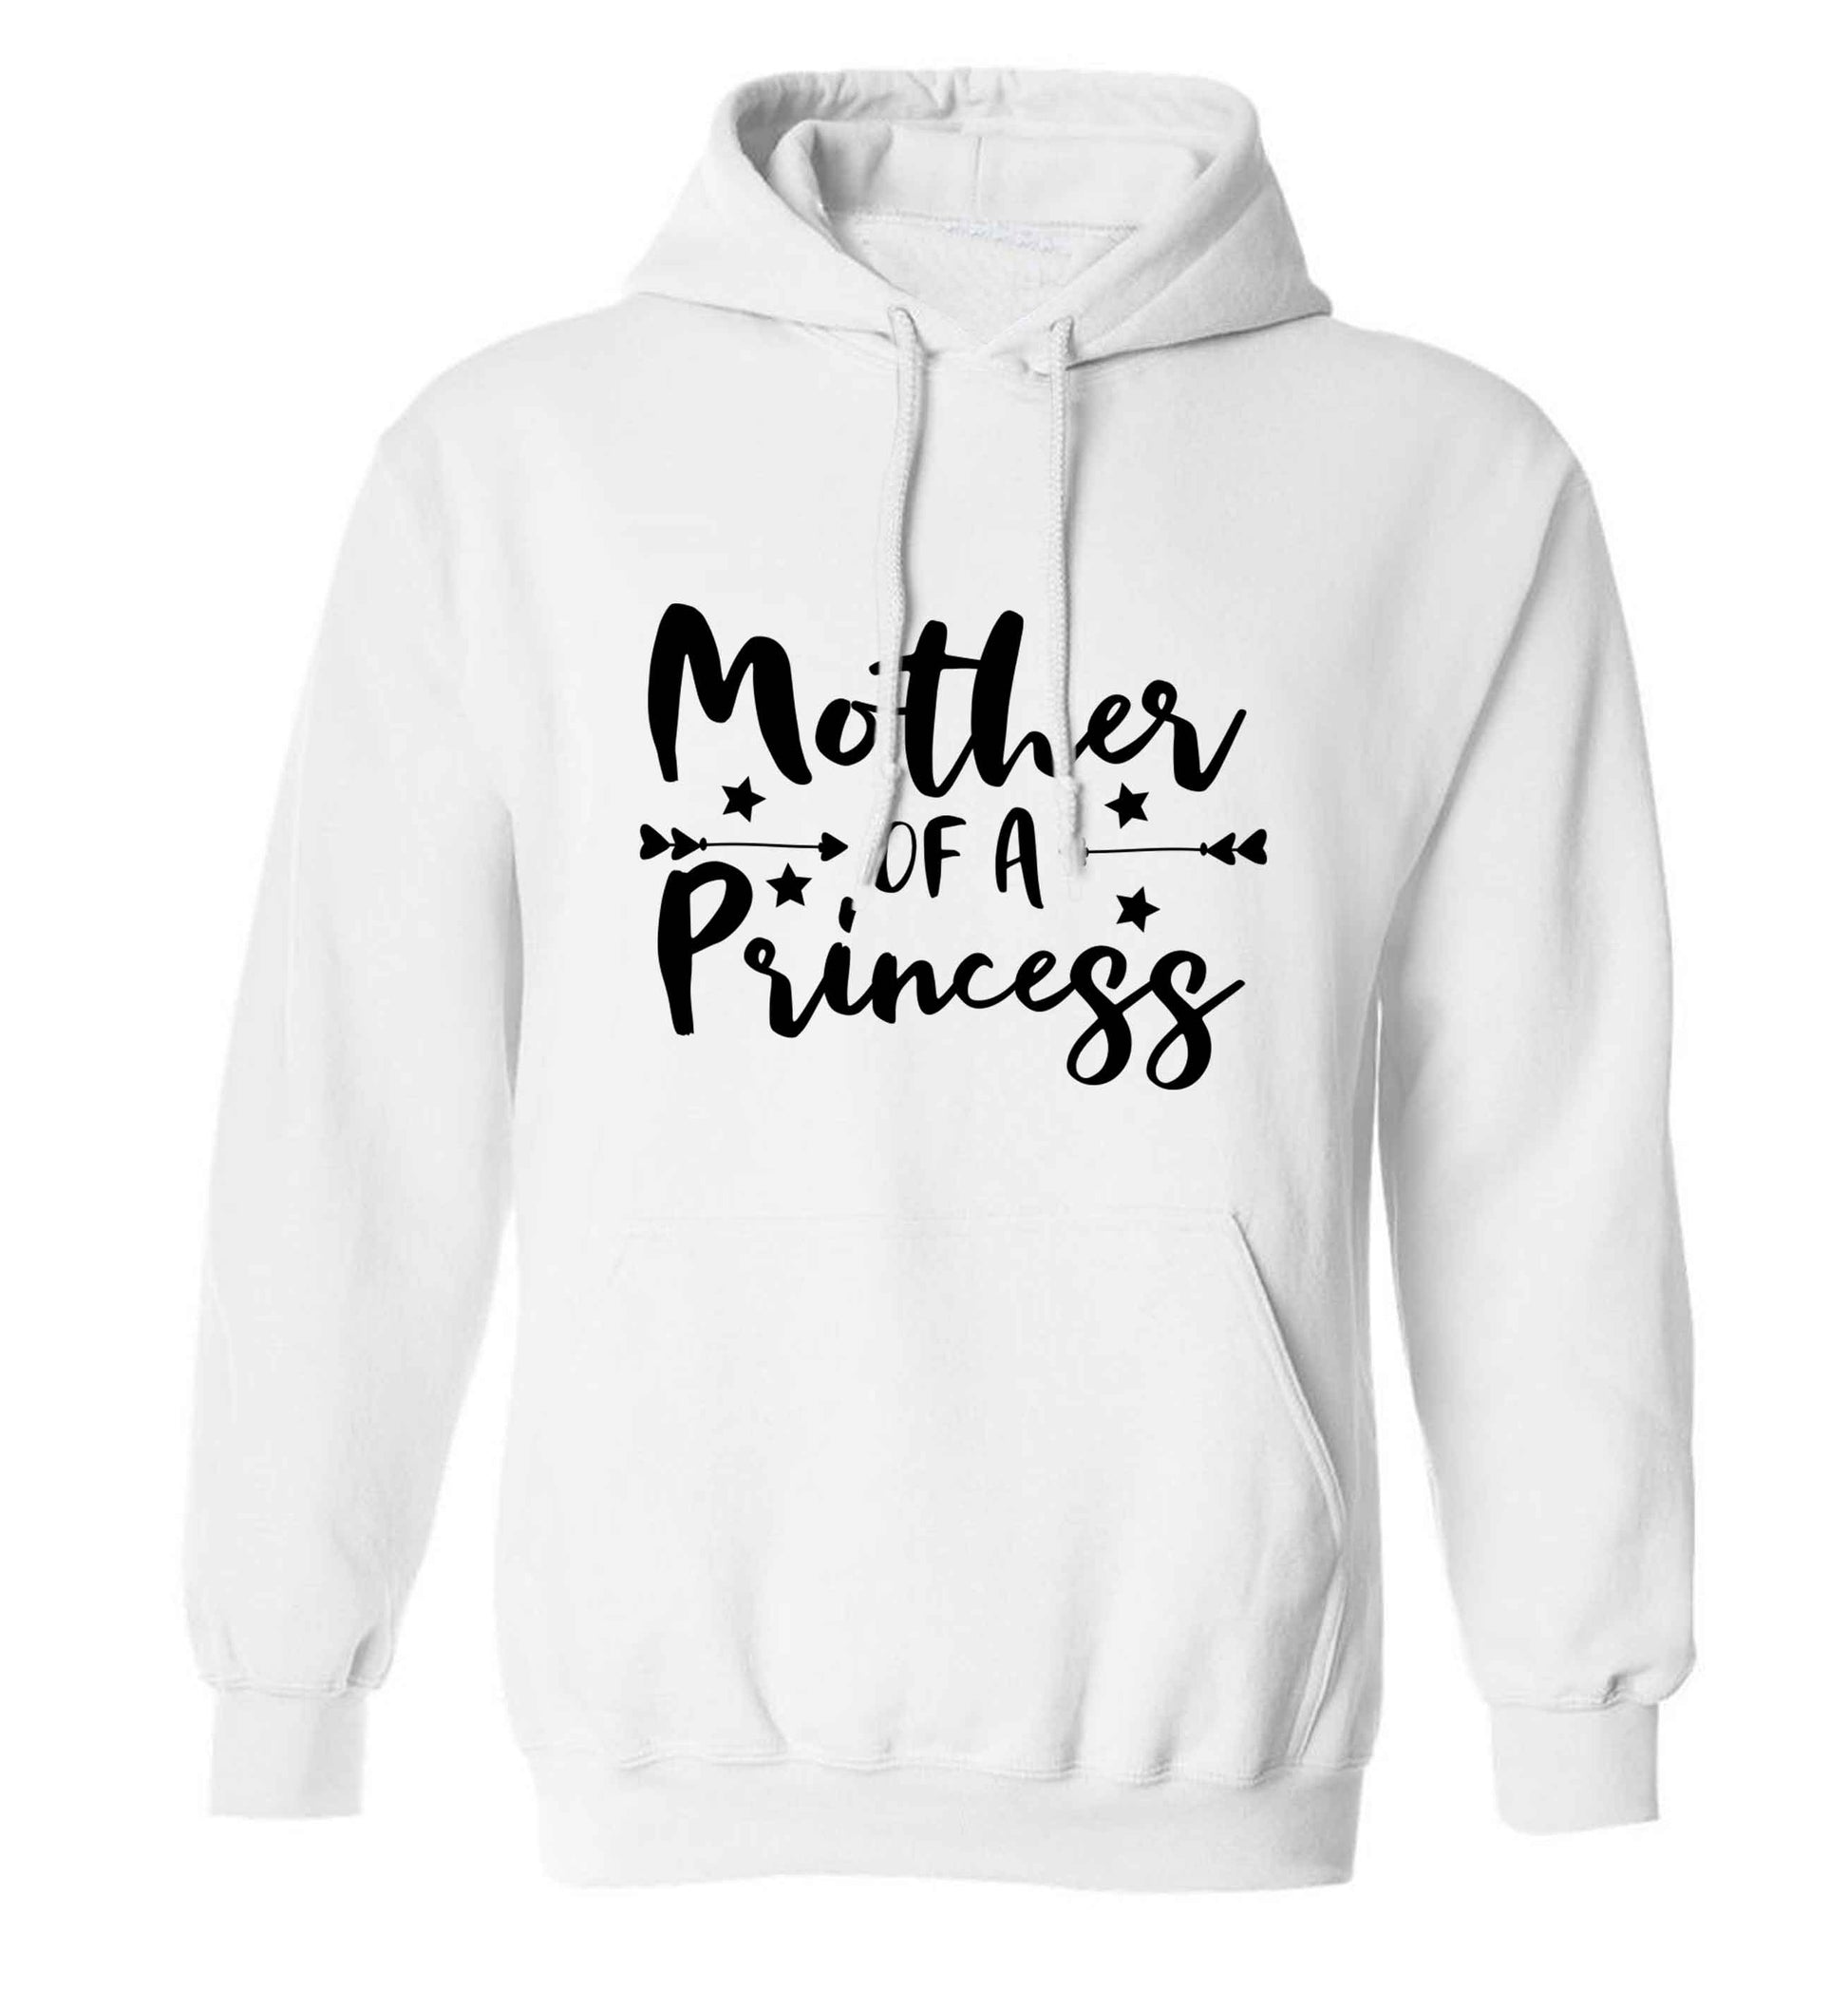 Mother of a princess adults unisex white hoodie 2XL